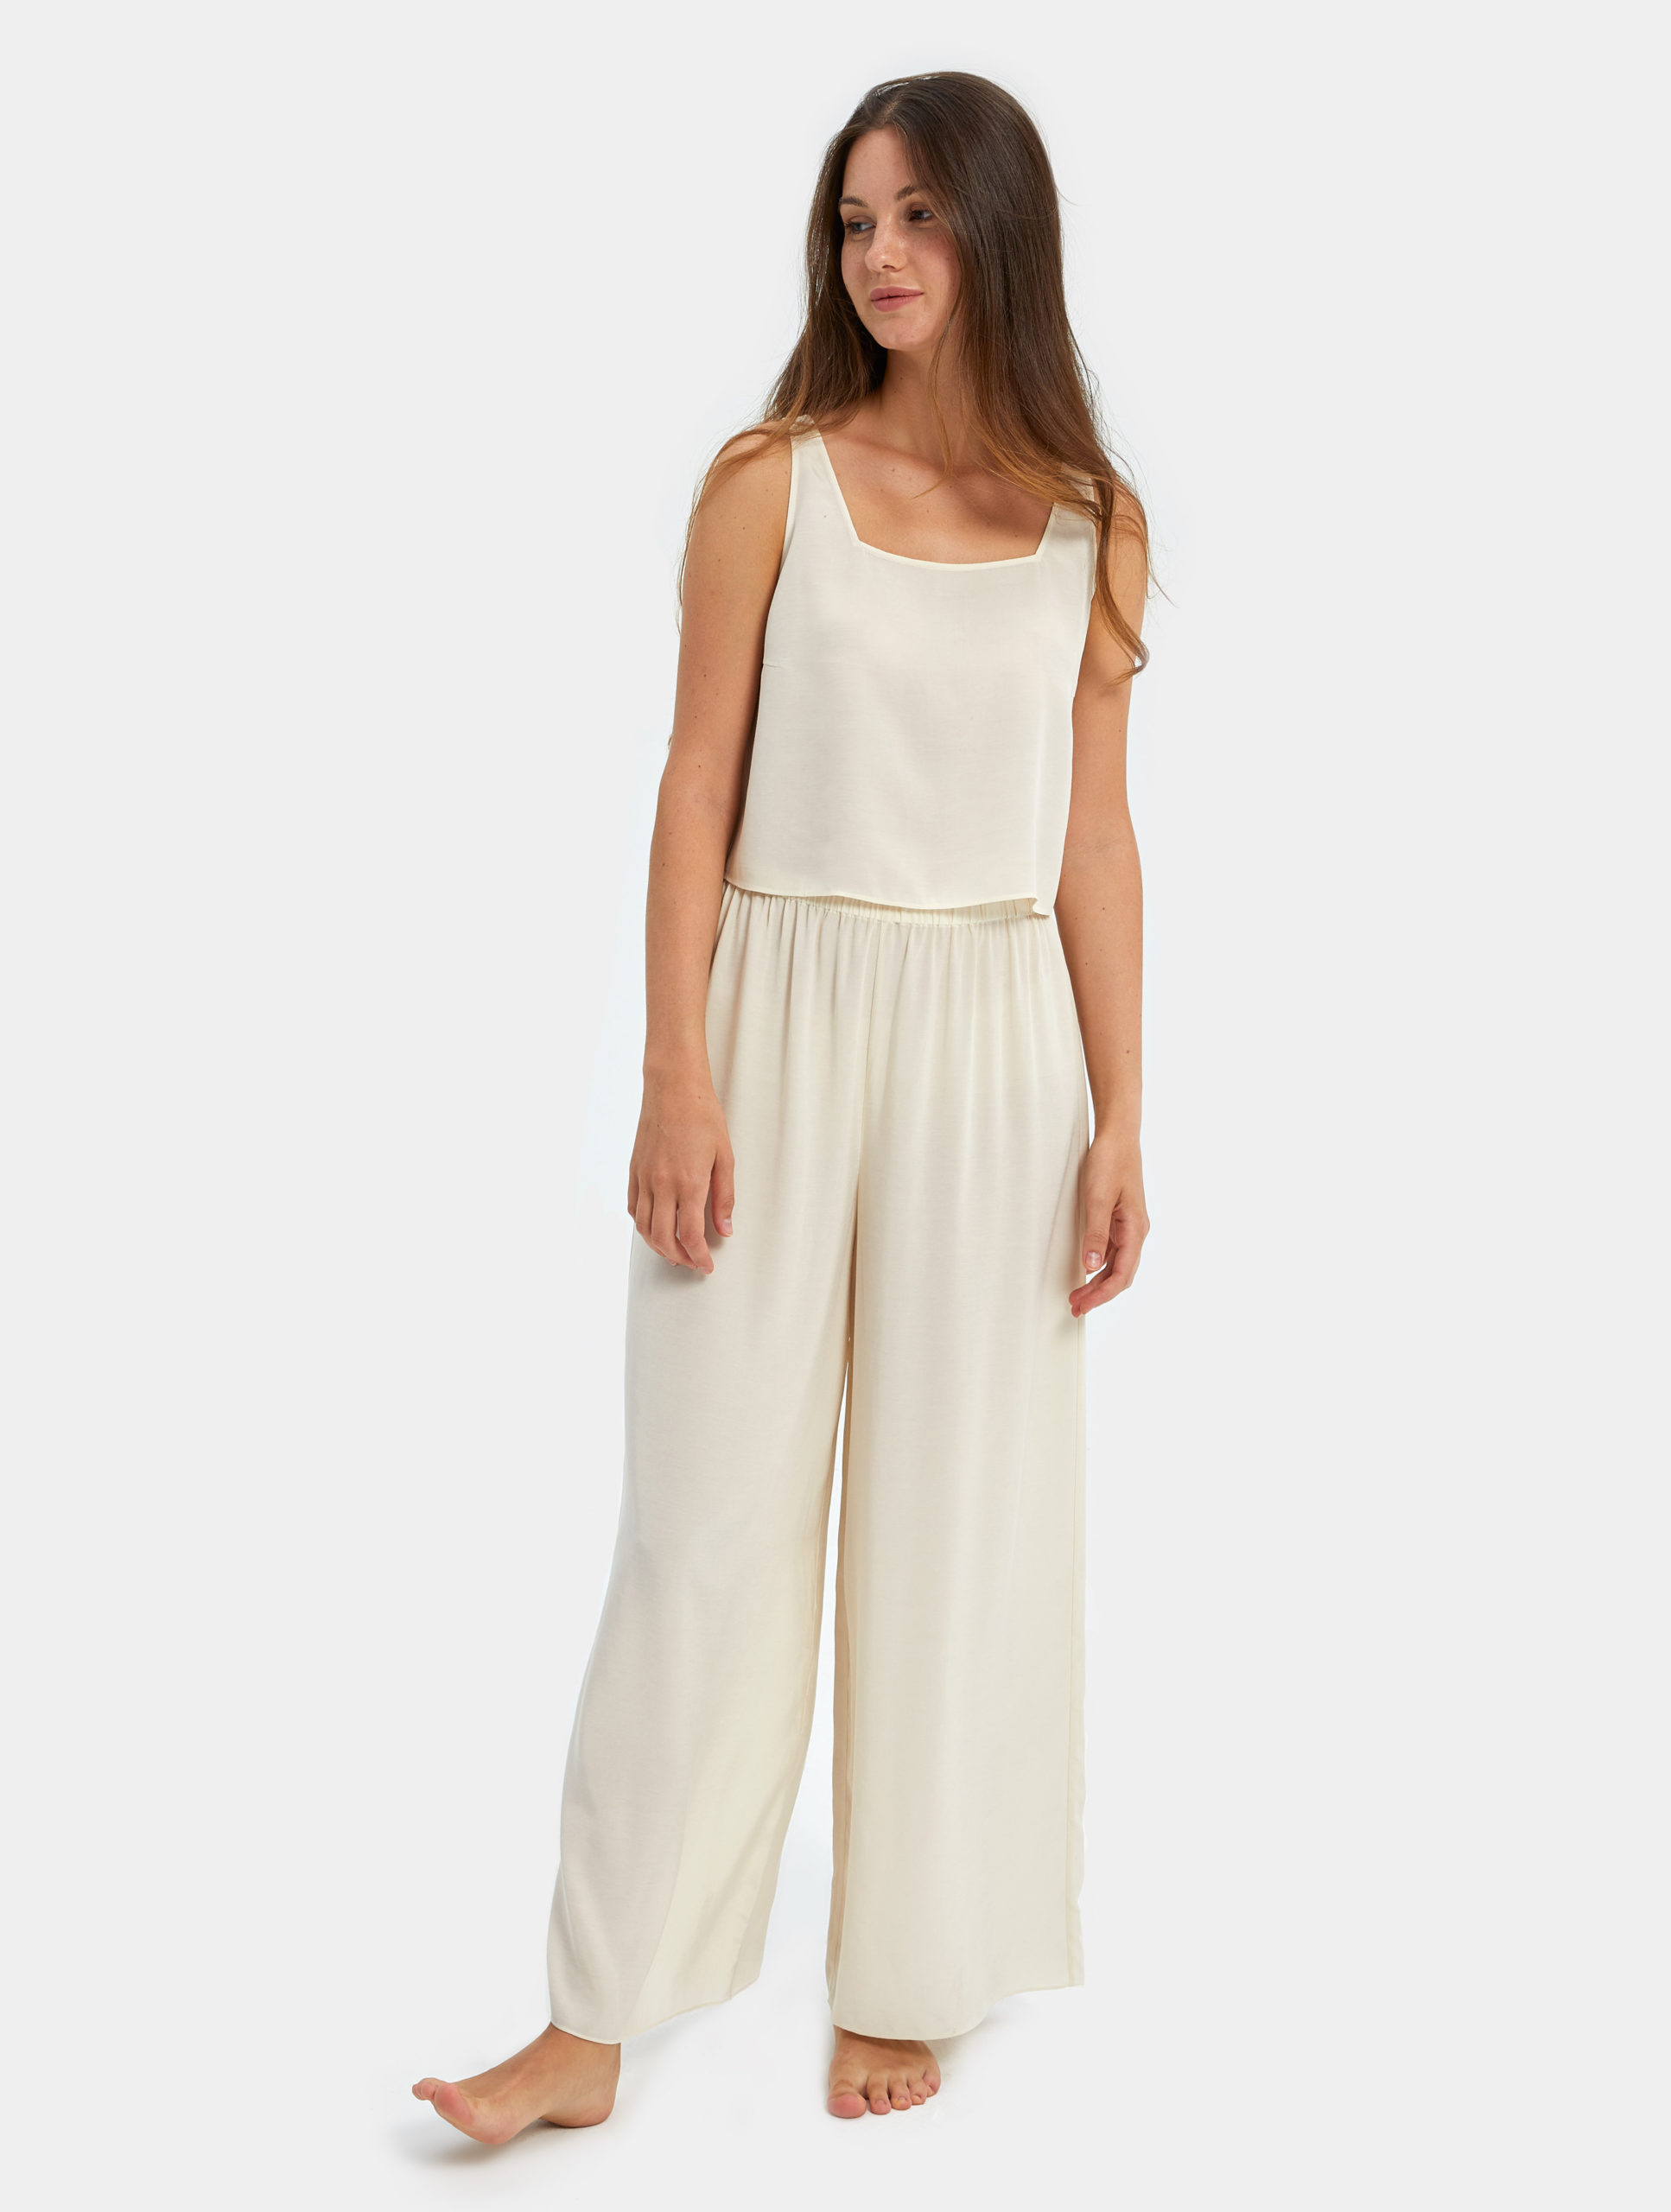 Ivory Crop Top and Pants Set